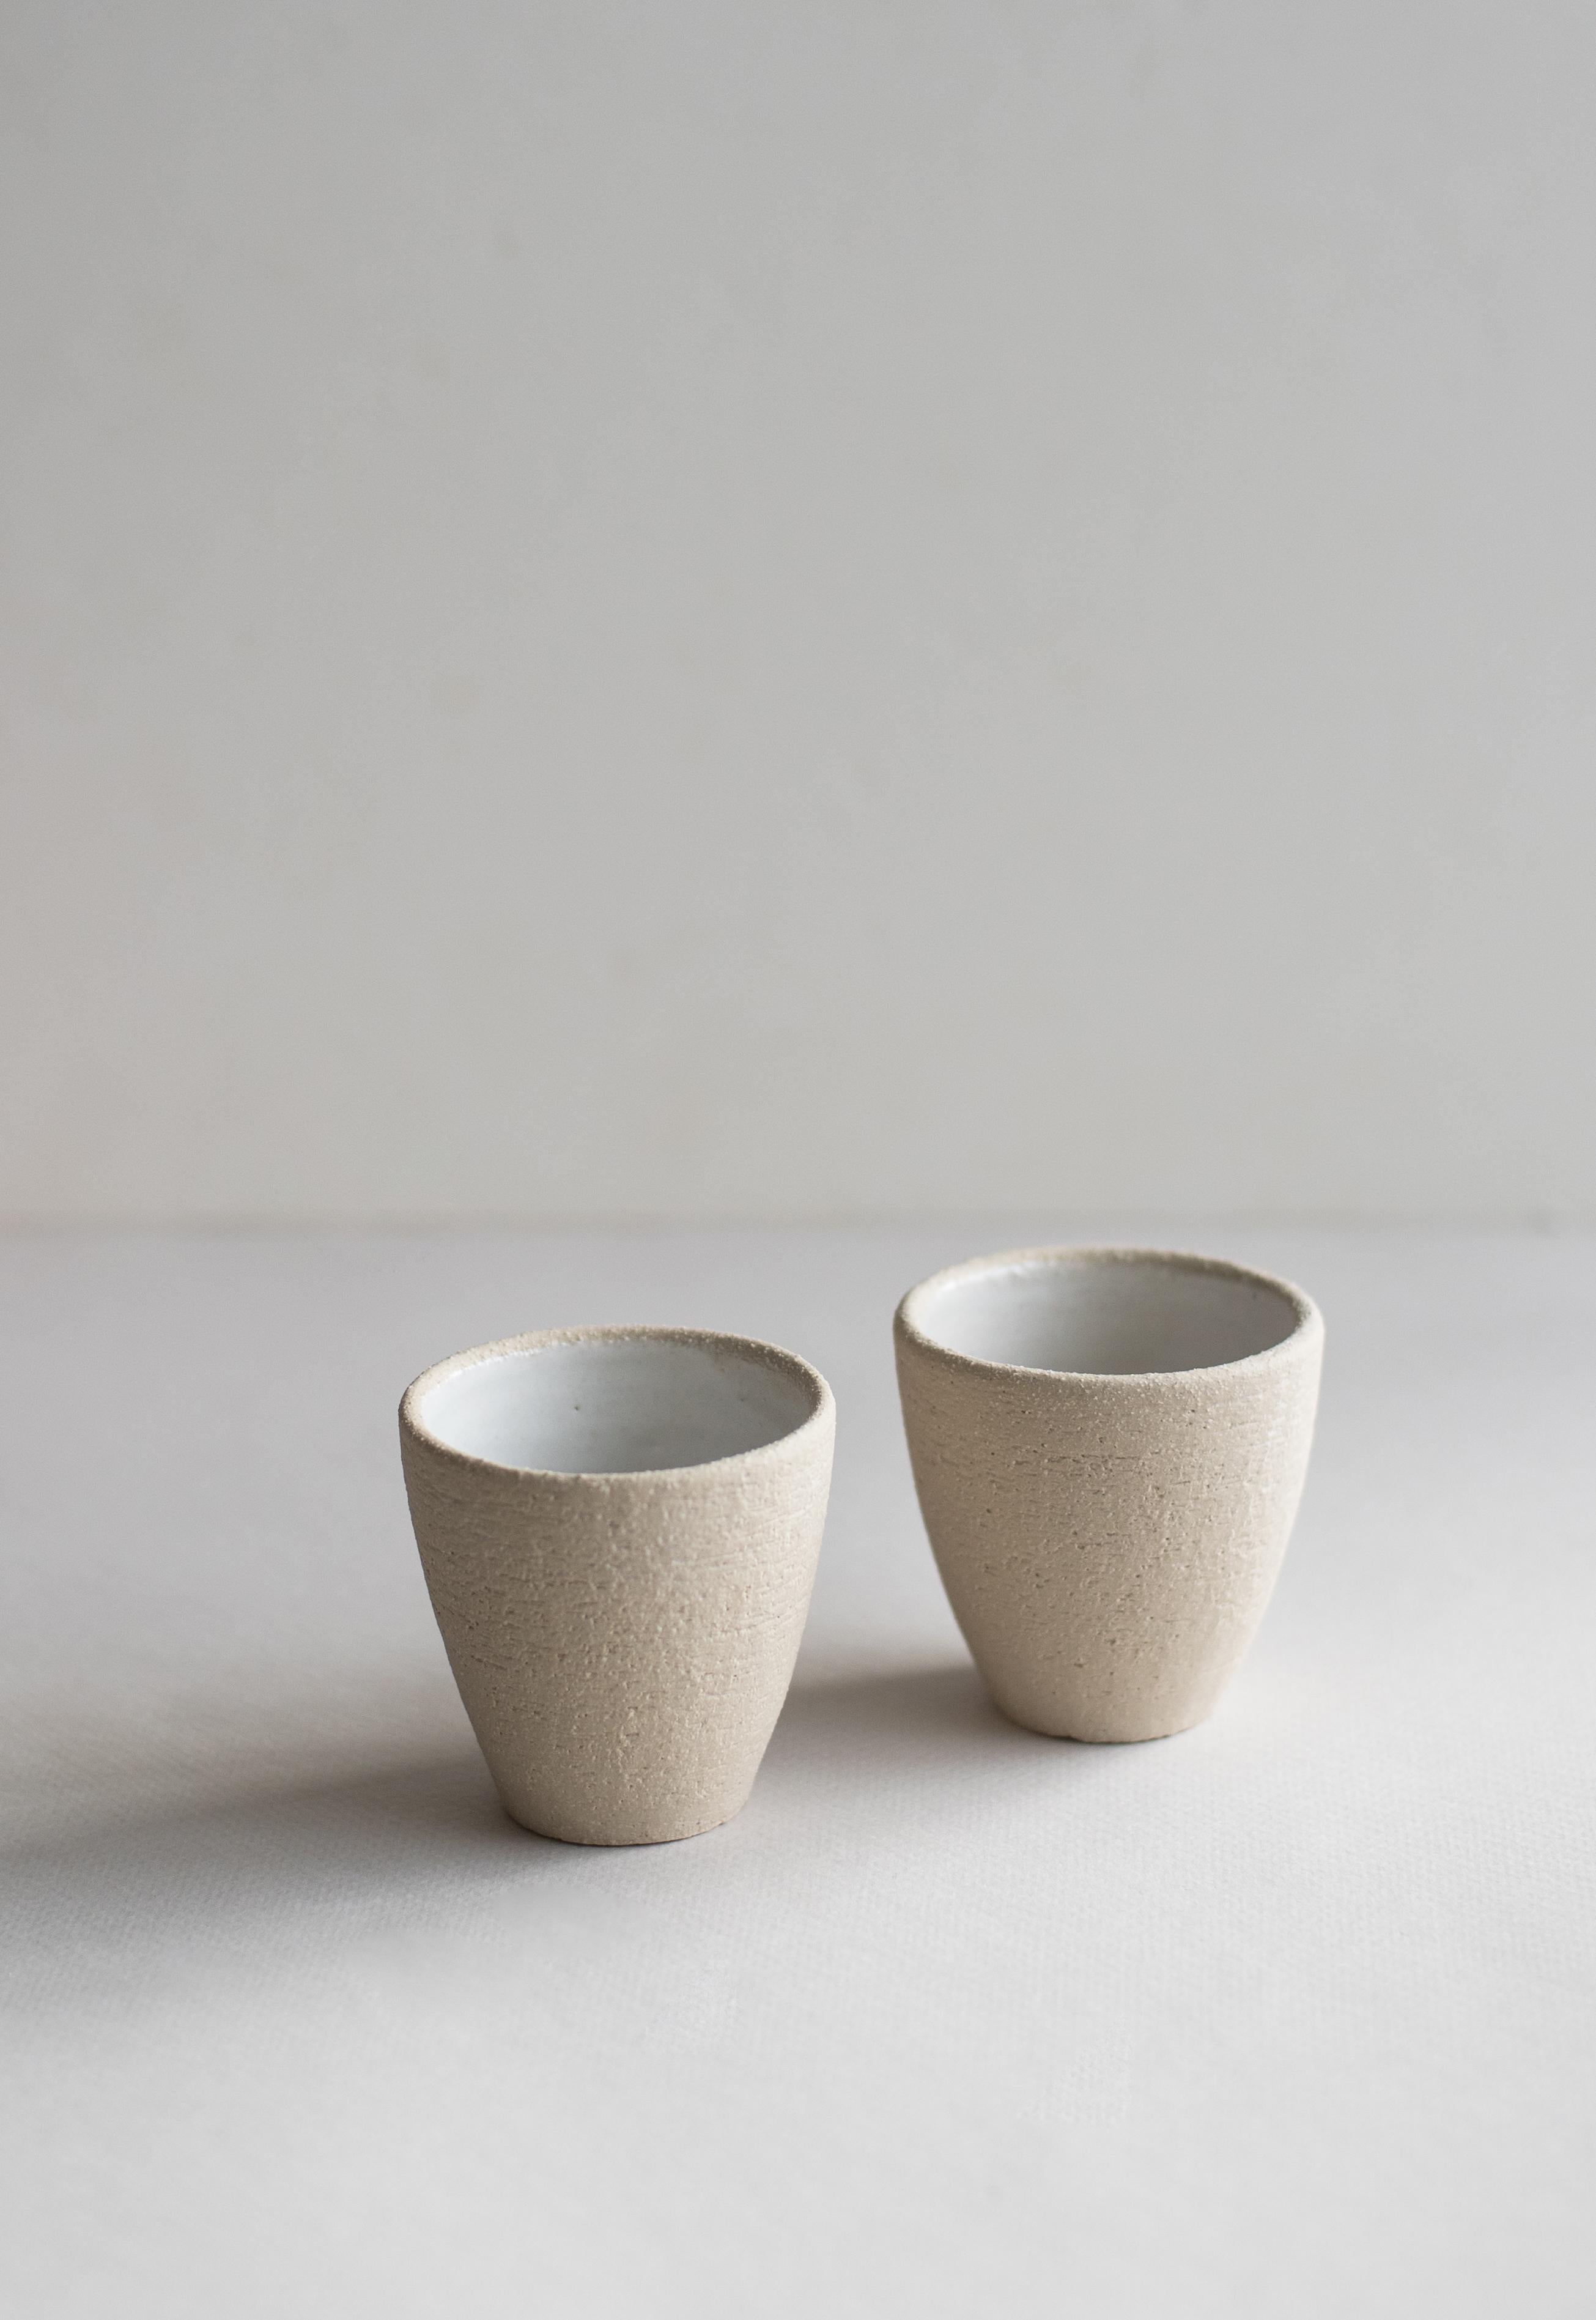 This tiny espresso cup with exposed clay from the outside and a white shiny glaze from the inside packs a petite punch as you caffeinate. Its shape and slightly rough texture bring fresh sophistication to the table.

- Stoneware
- Dishwasher-,